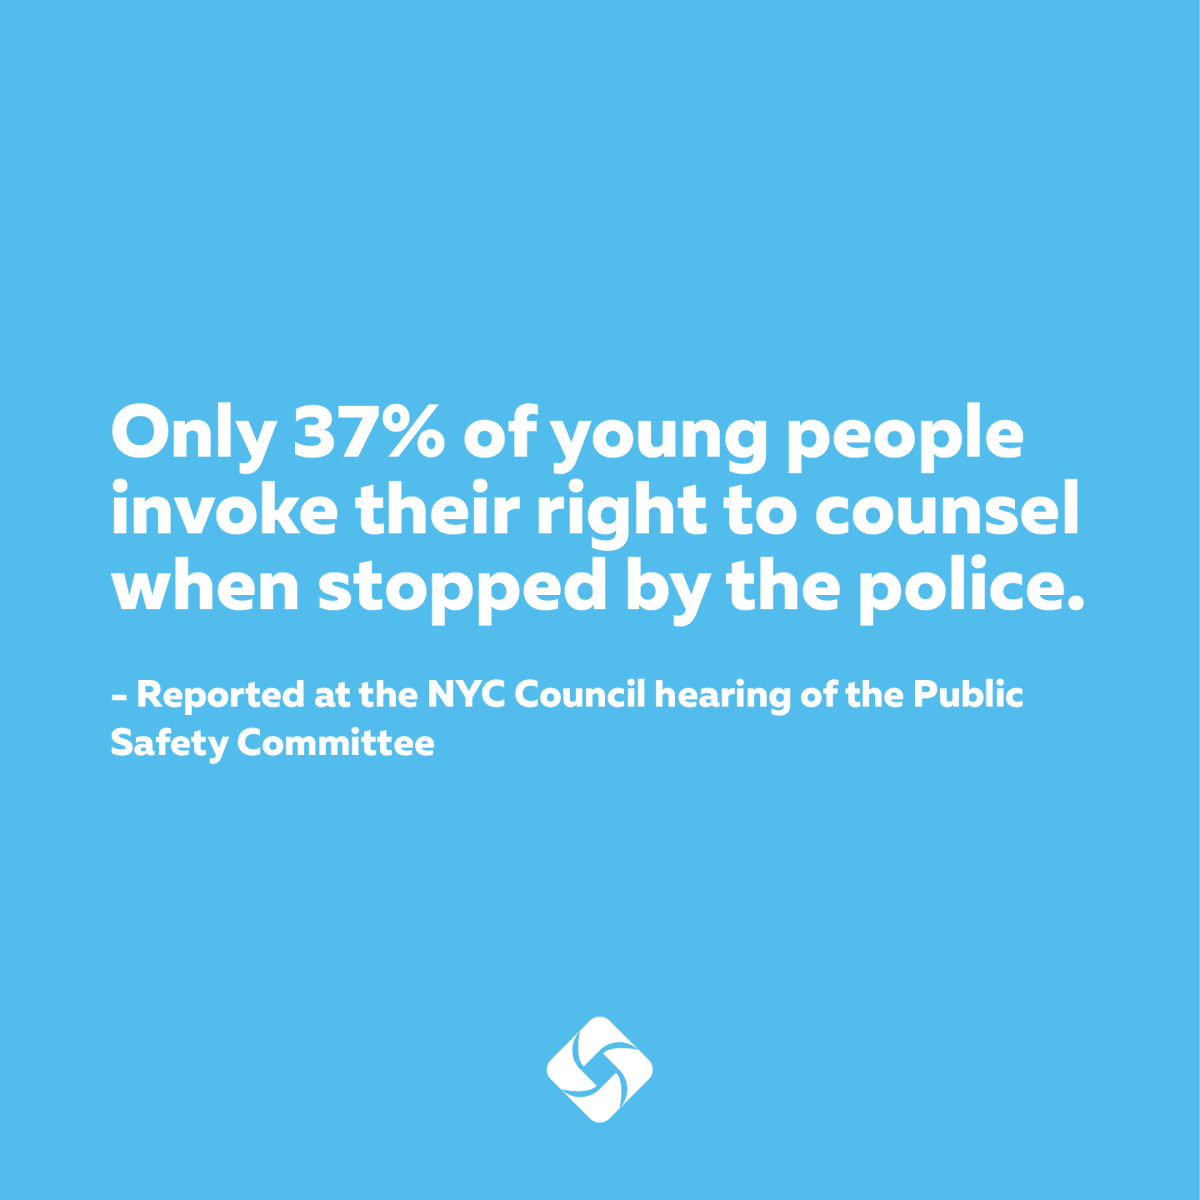 Let's work to get a full 100% of all young people to invoke their right to counsel. With passing #right2remainsilent, this can be a reality!